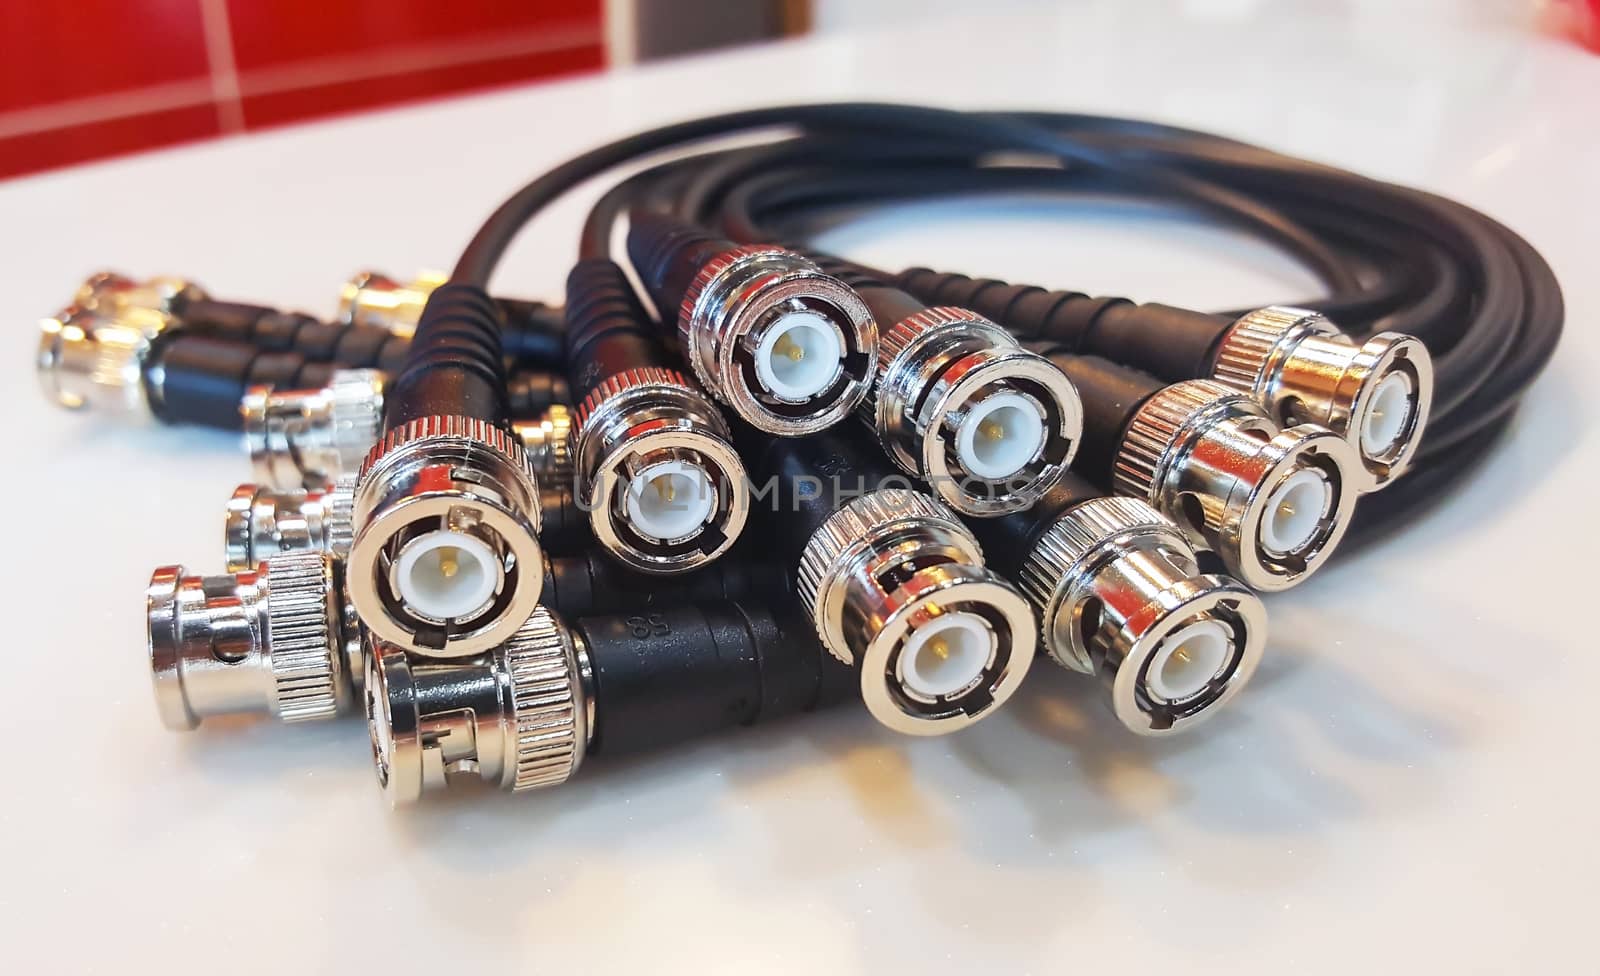 BNC connector for audio and video signals. by wattanaphob